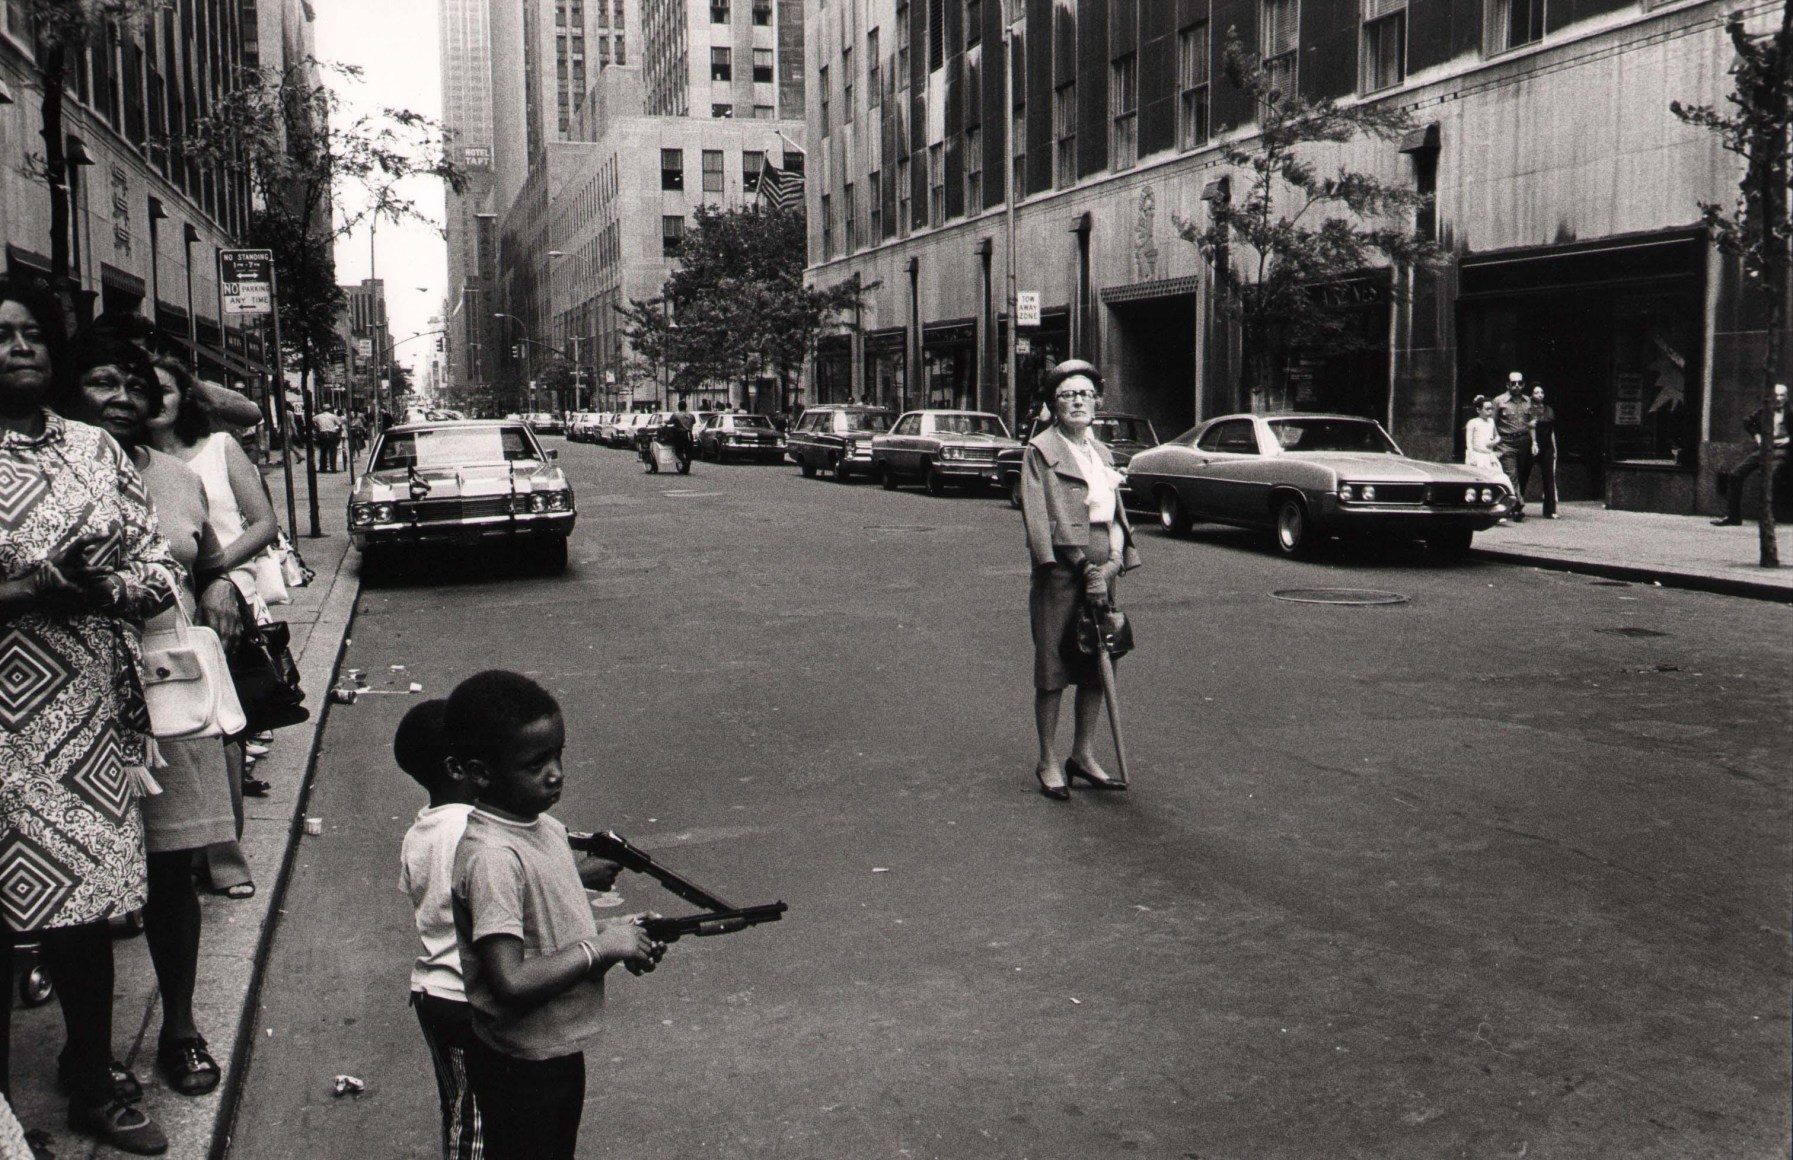 17. Anthony Barboza, NYC, ​1970s. Street scene. Two small black children holding toy guns in the foreground with a line of women on the sidewalk to the left. A middle-aged white woman stands in the center of the car-lined street.